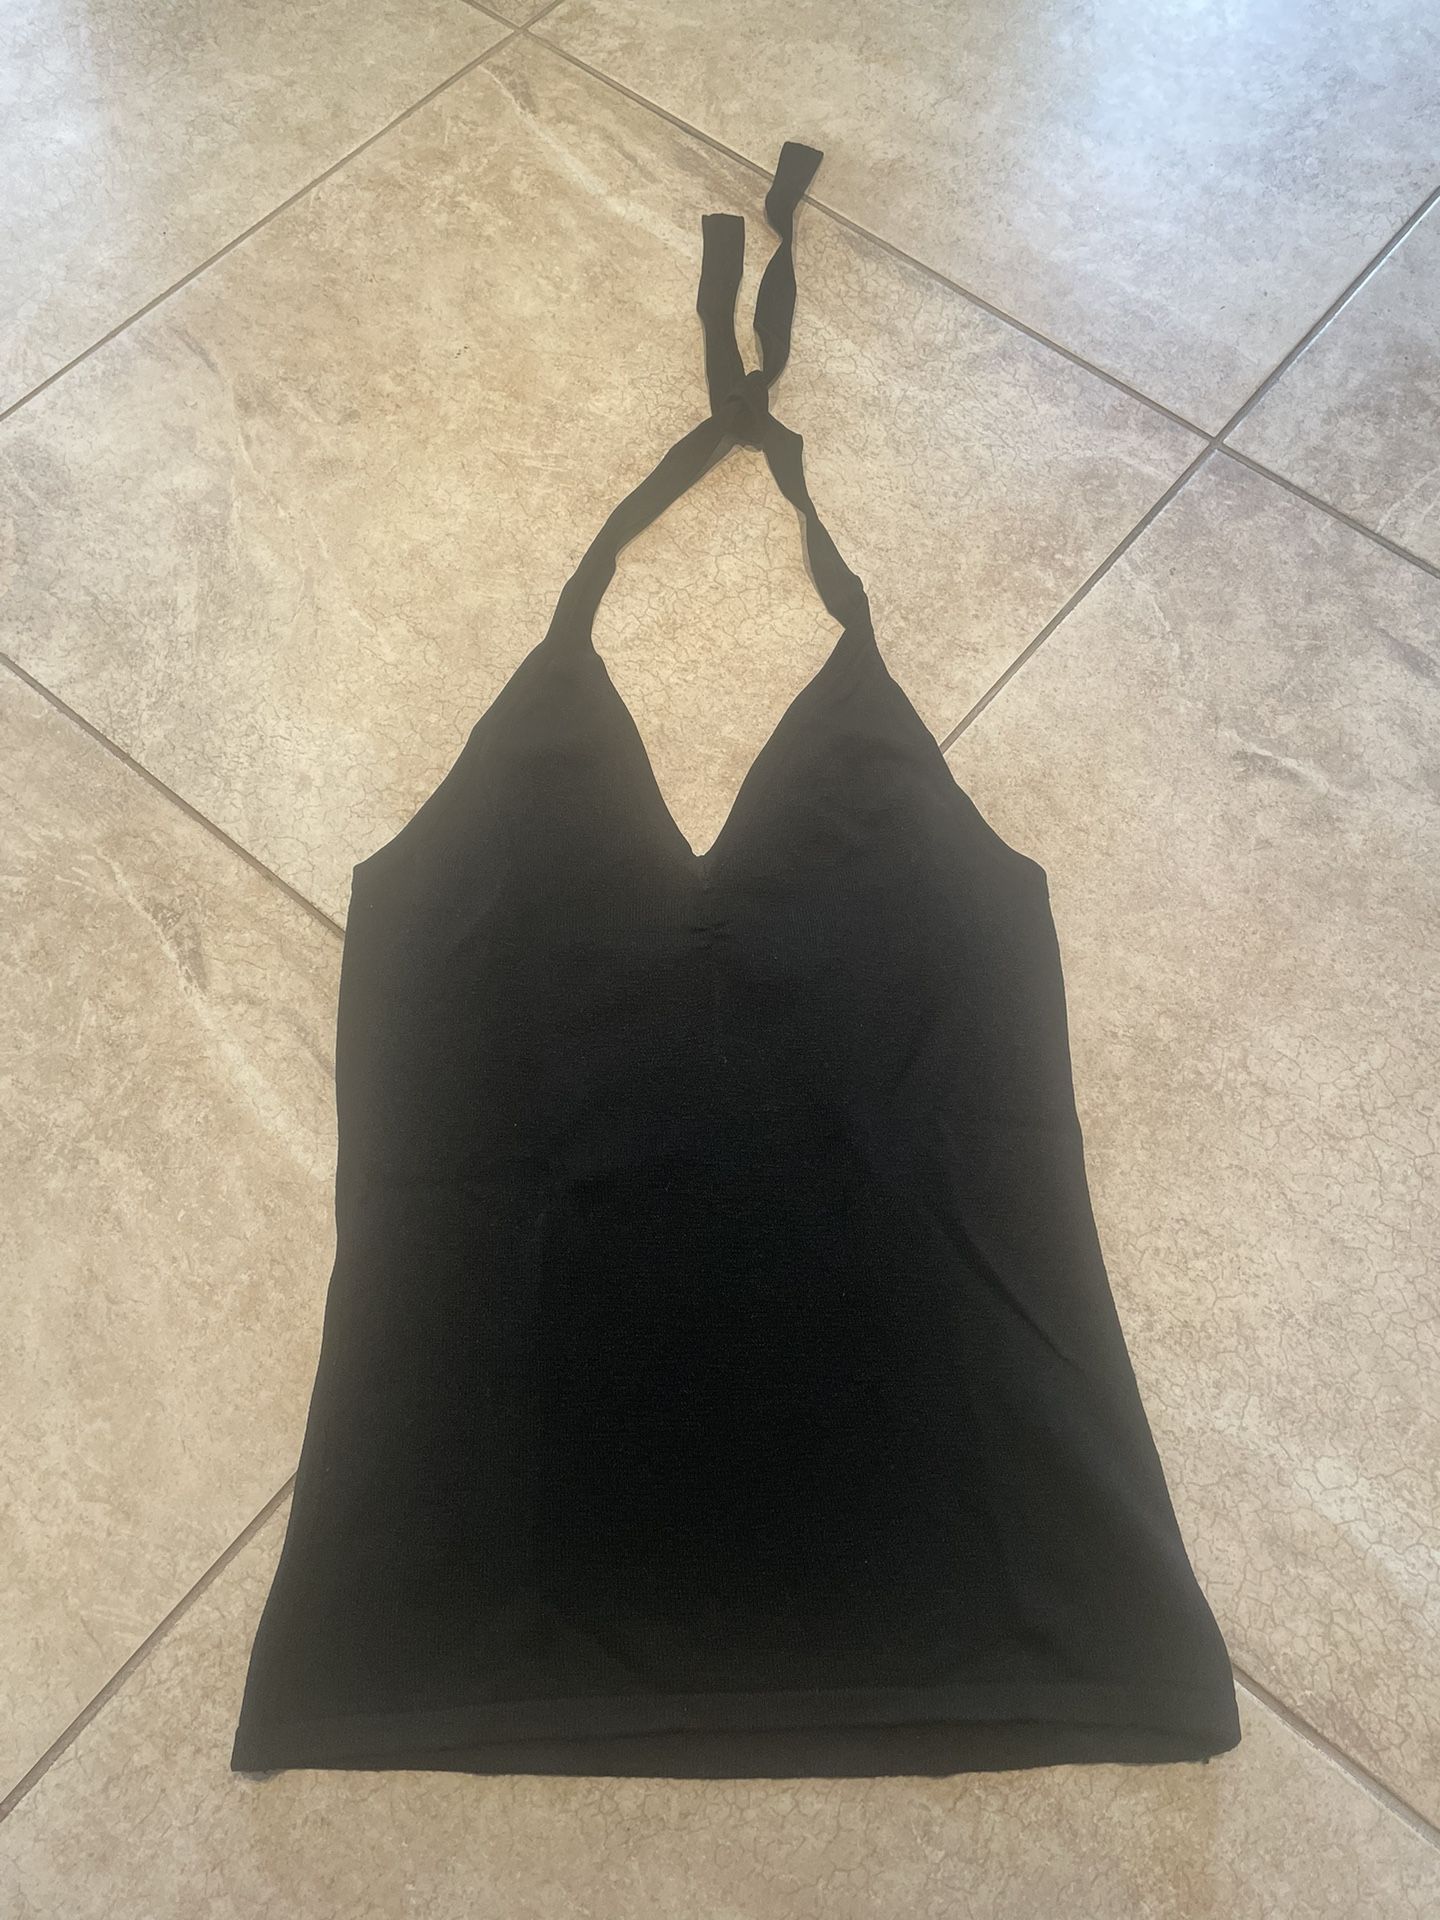 Women's halter top. One size. No brand, no tag.